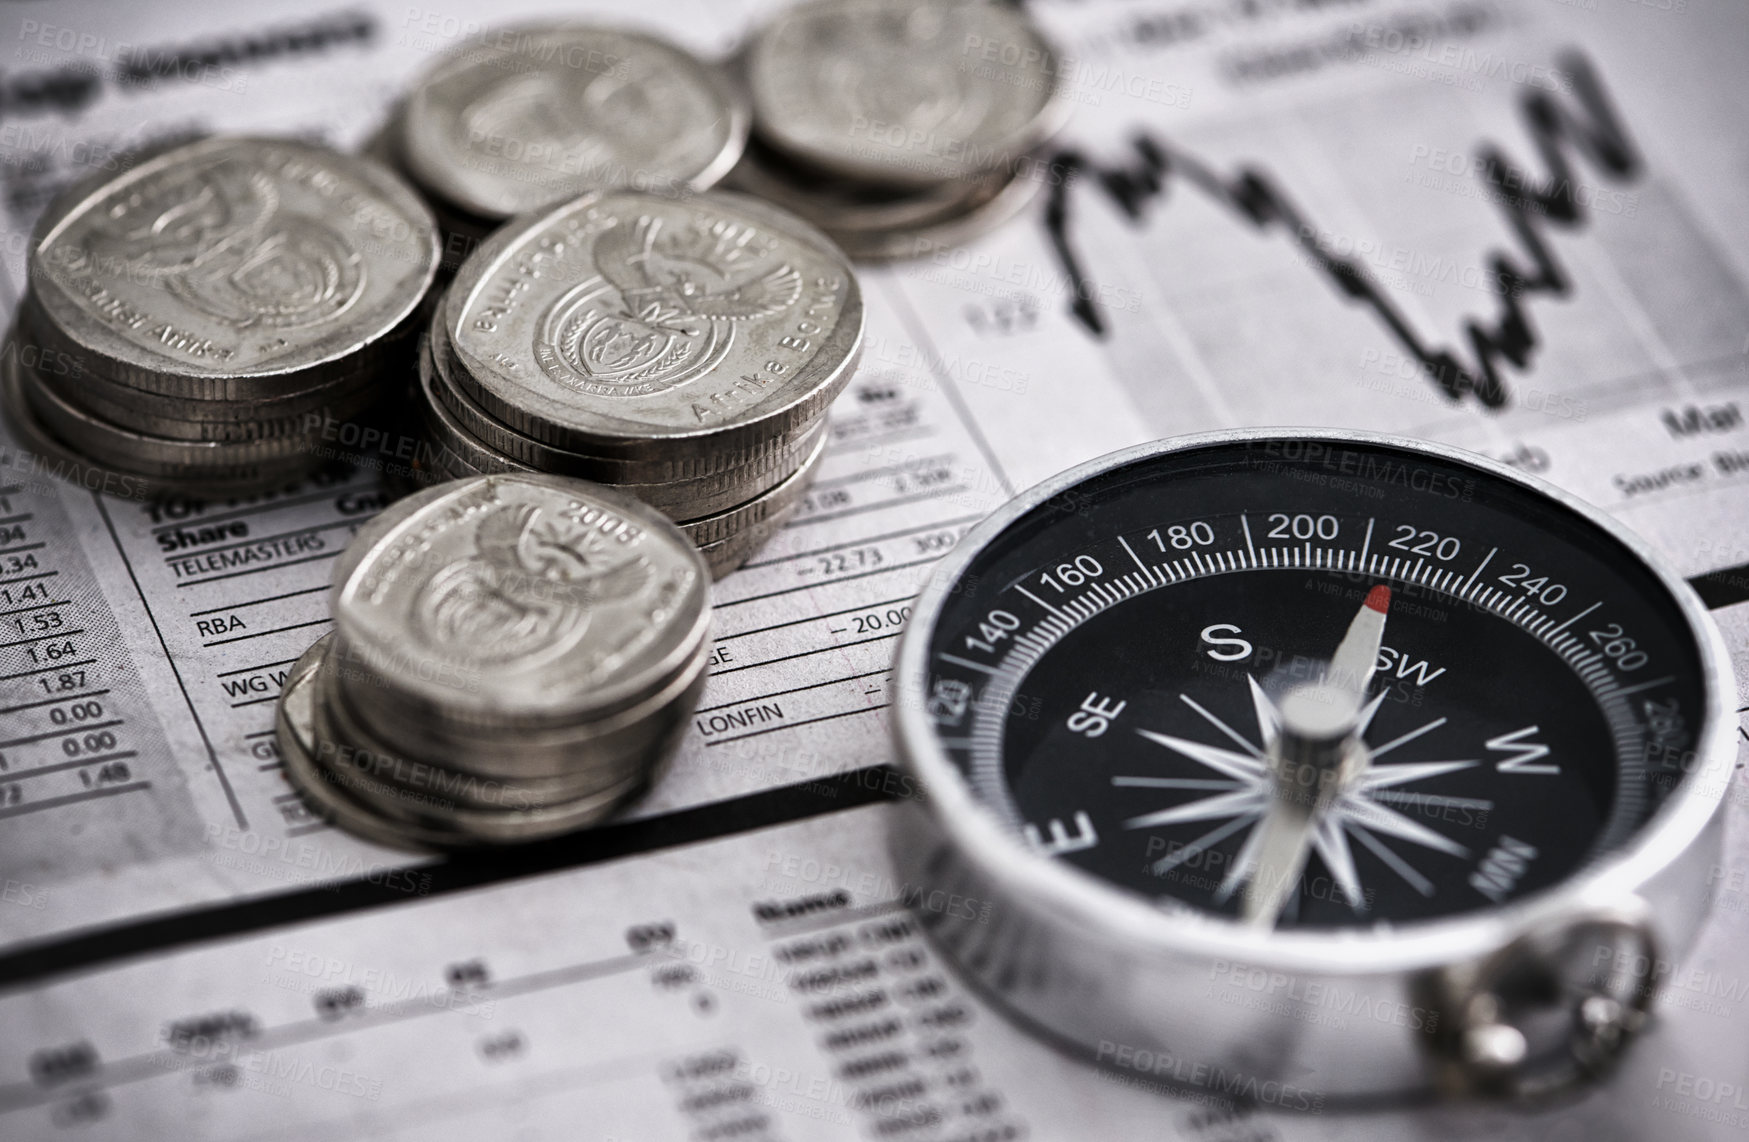 Buy stock photo Studio shot of coins and a compass on the business section of a newspaper